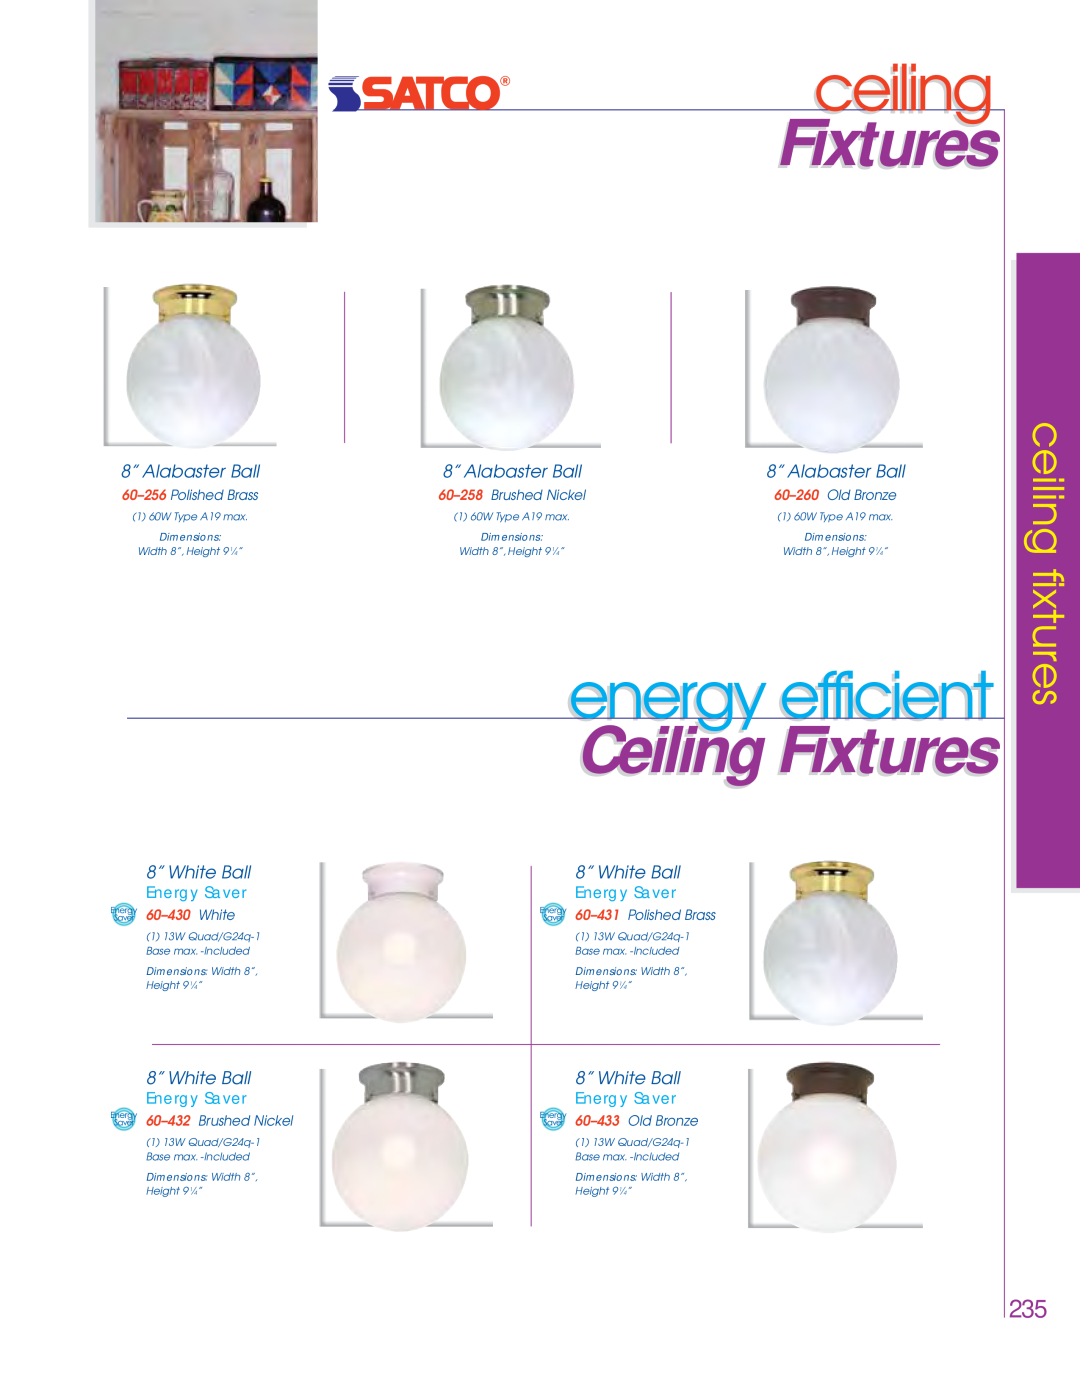 Satco Products 76-693 ceiling, energy efficient, Ceiling Fixtures, fixtures, 8” Alabaster Ball, Energy Saver, Old Bronze 